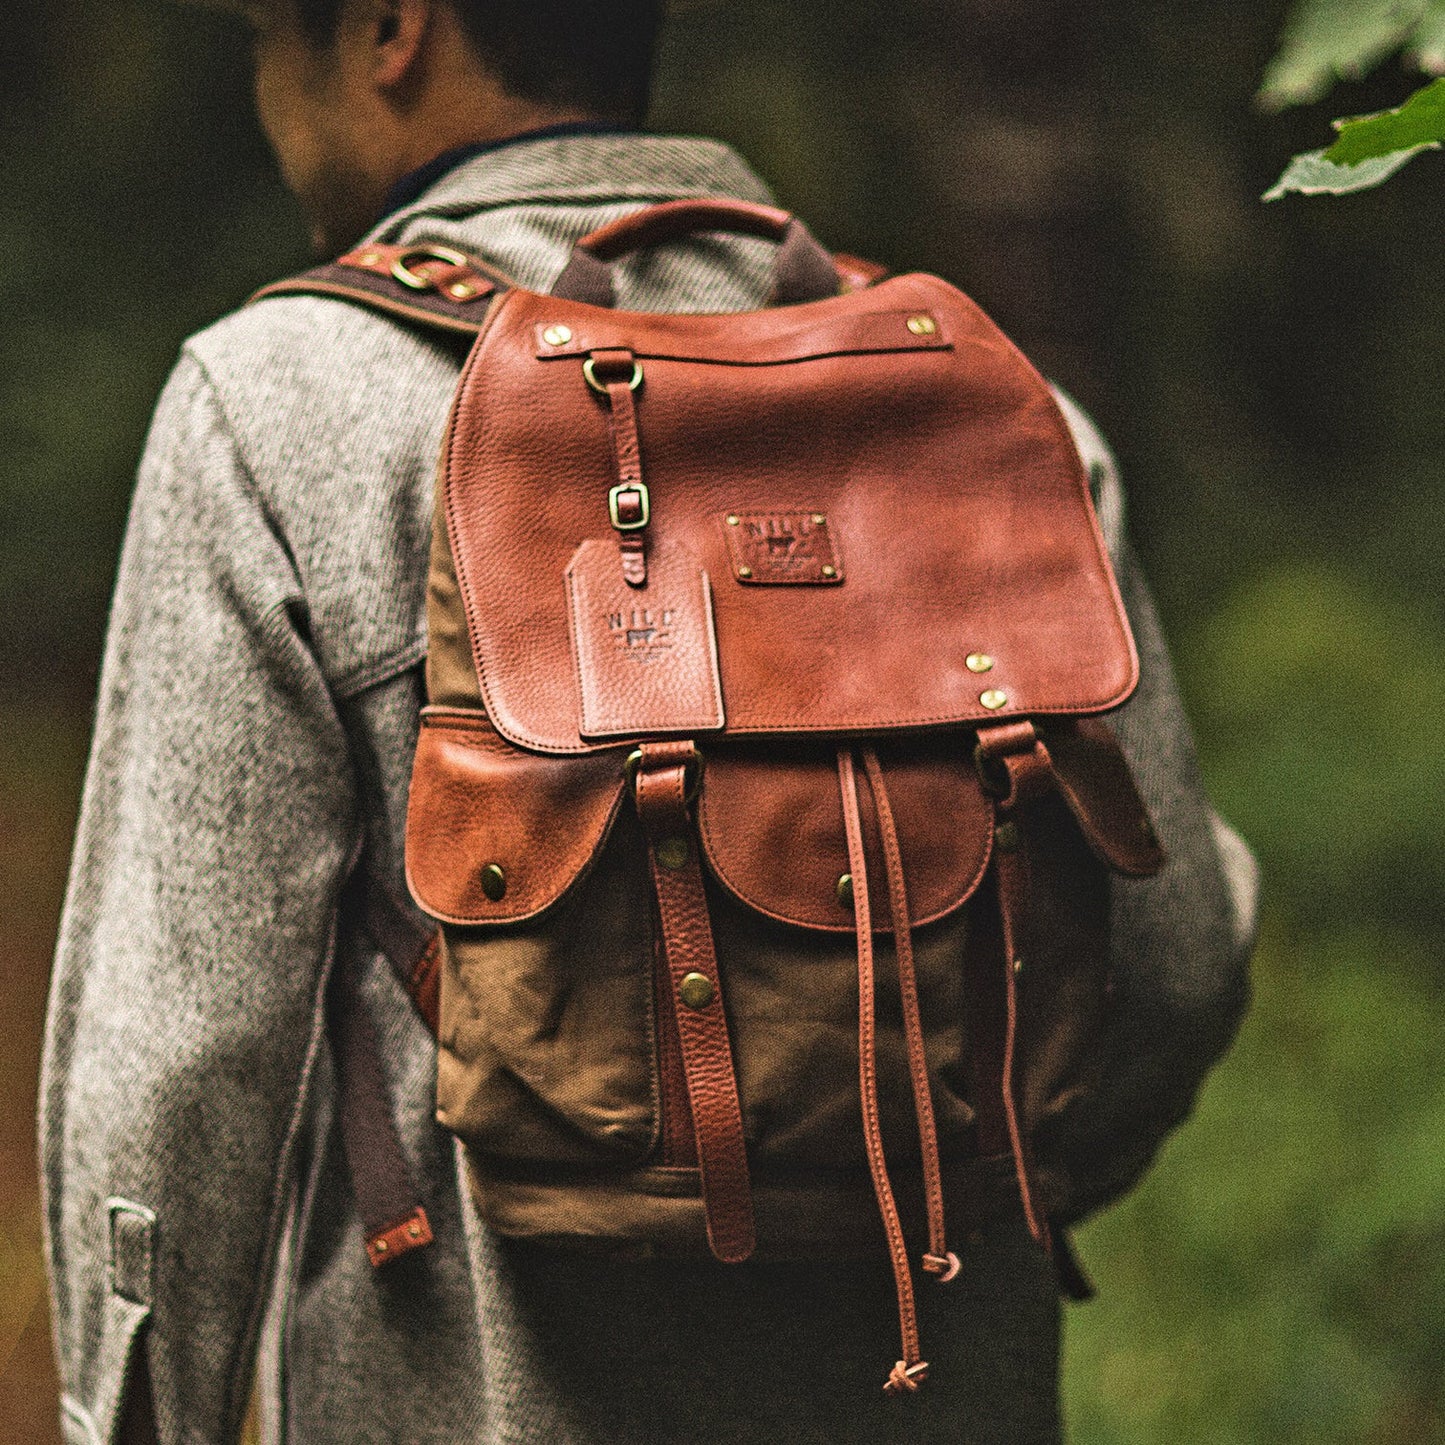 The Will Leather Goods Lennon Canvas & Leather Backpack in colors tobacco and cognac